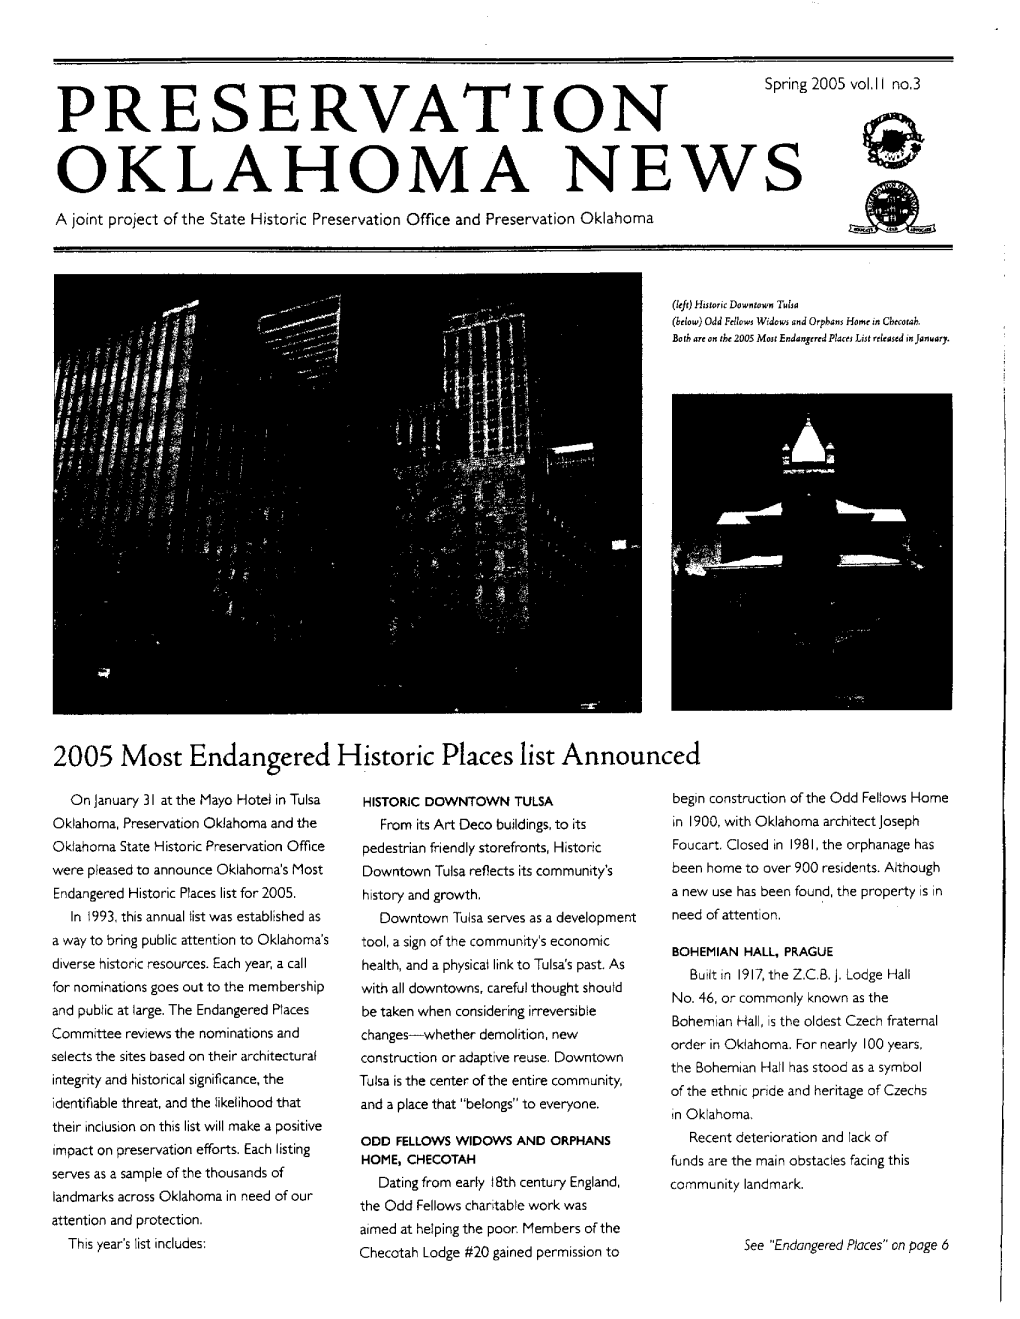 PRESERVATION Spring 2005 Vol.1 L No.3 OKLAHOMA NEWS a Joint Project of the State Historic Preservation Office and Preservation Oklahoma